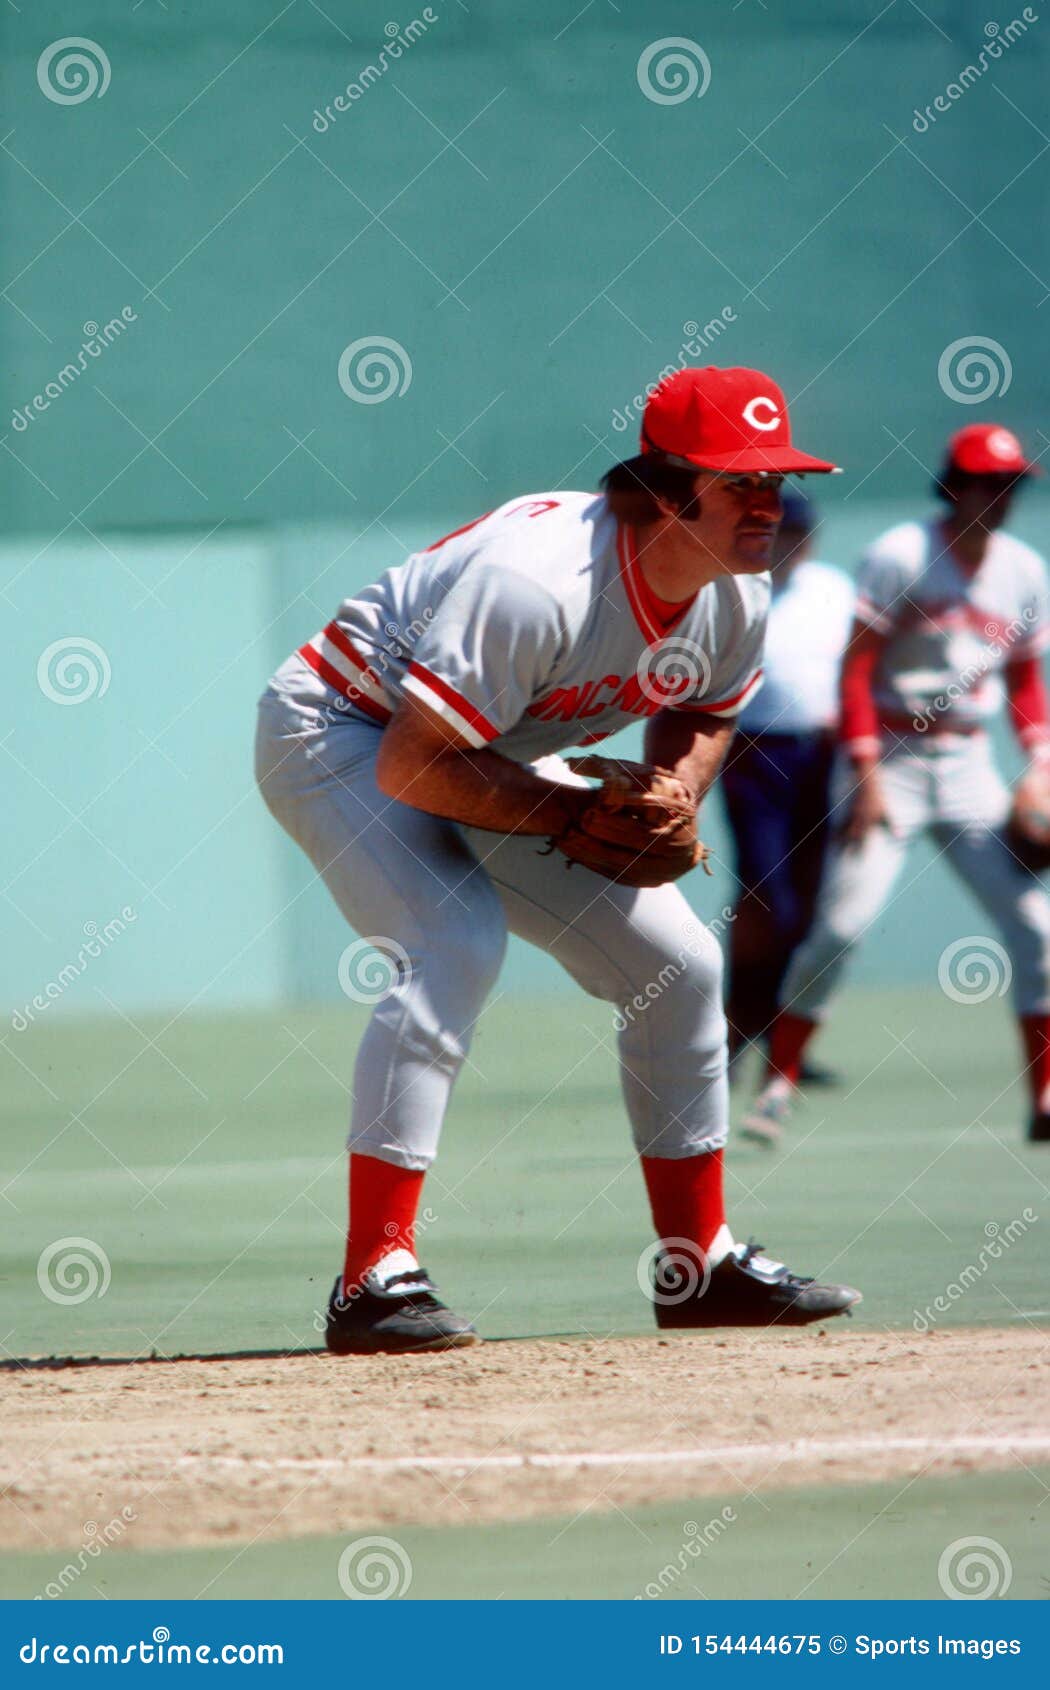 1985 PETE ROSE Cincinnati Reds BASEBALL ACTION Glossy Photo 8x10 PICTURE WOW!! 